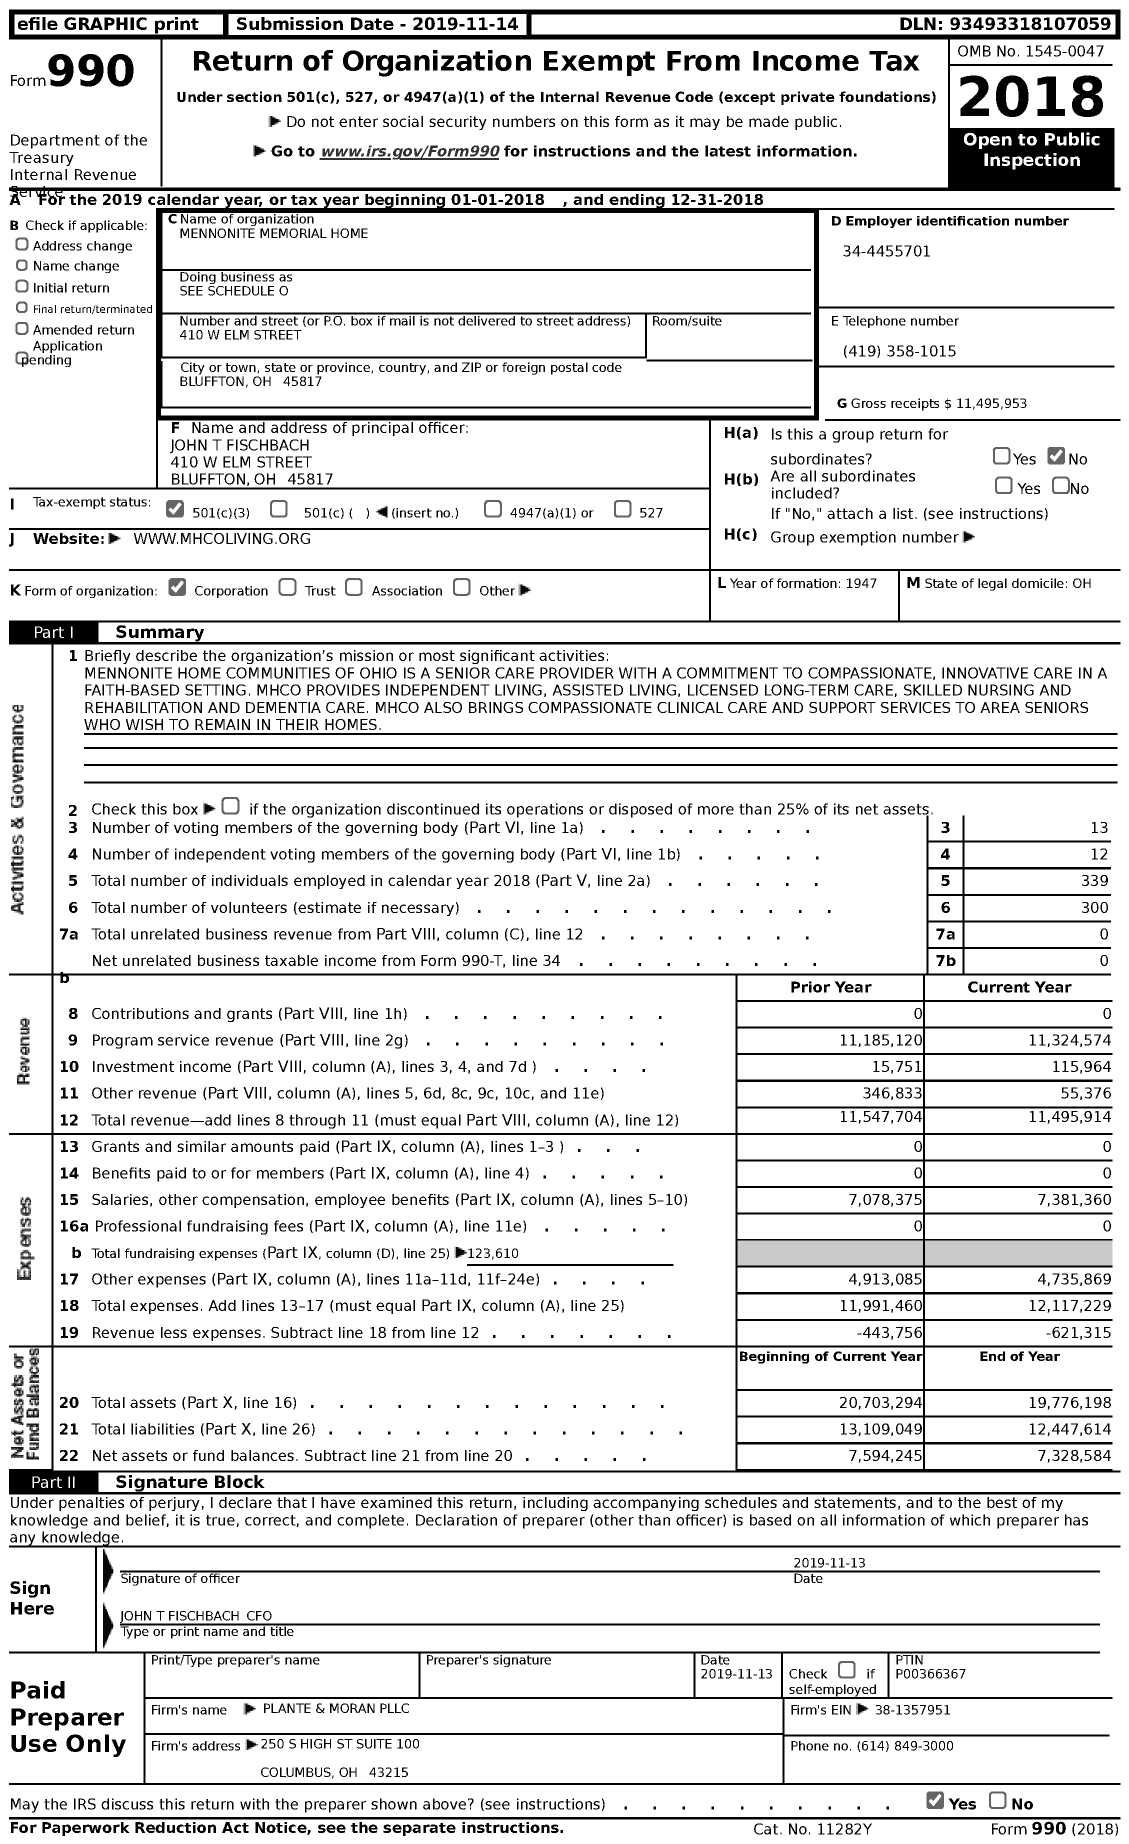 Image of first page of 2018 Form 990 for Mennonite Home Communities of Ohio (MHCO)